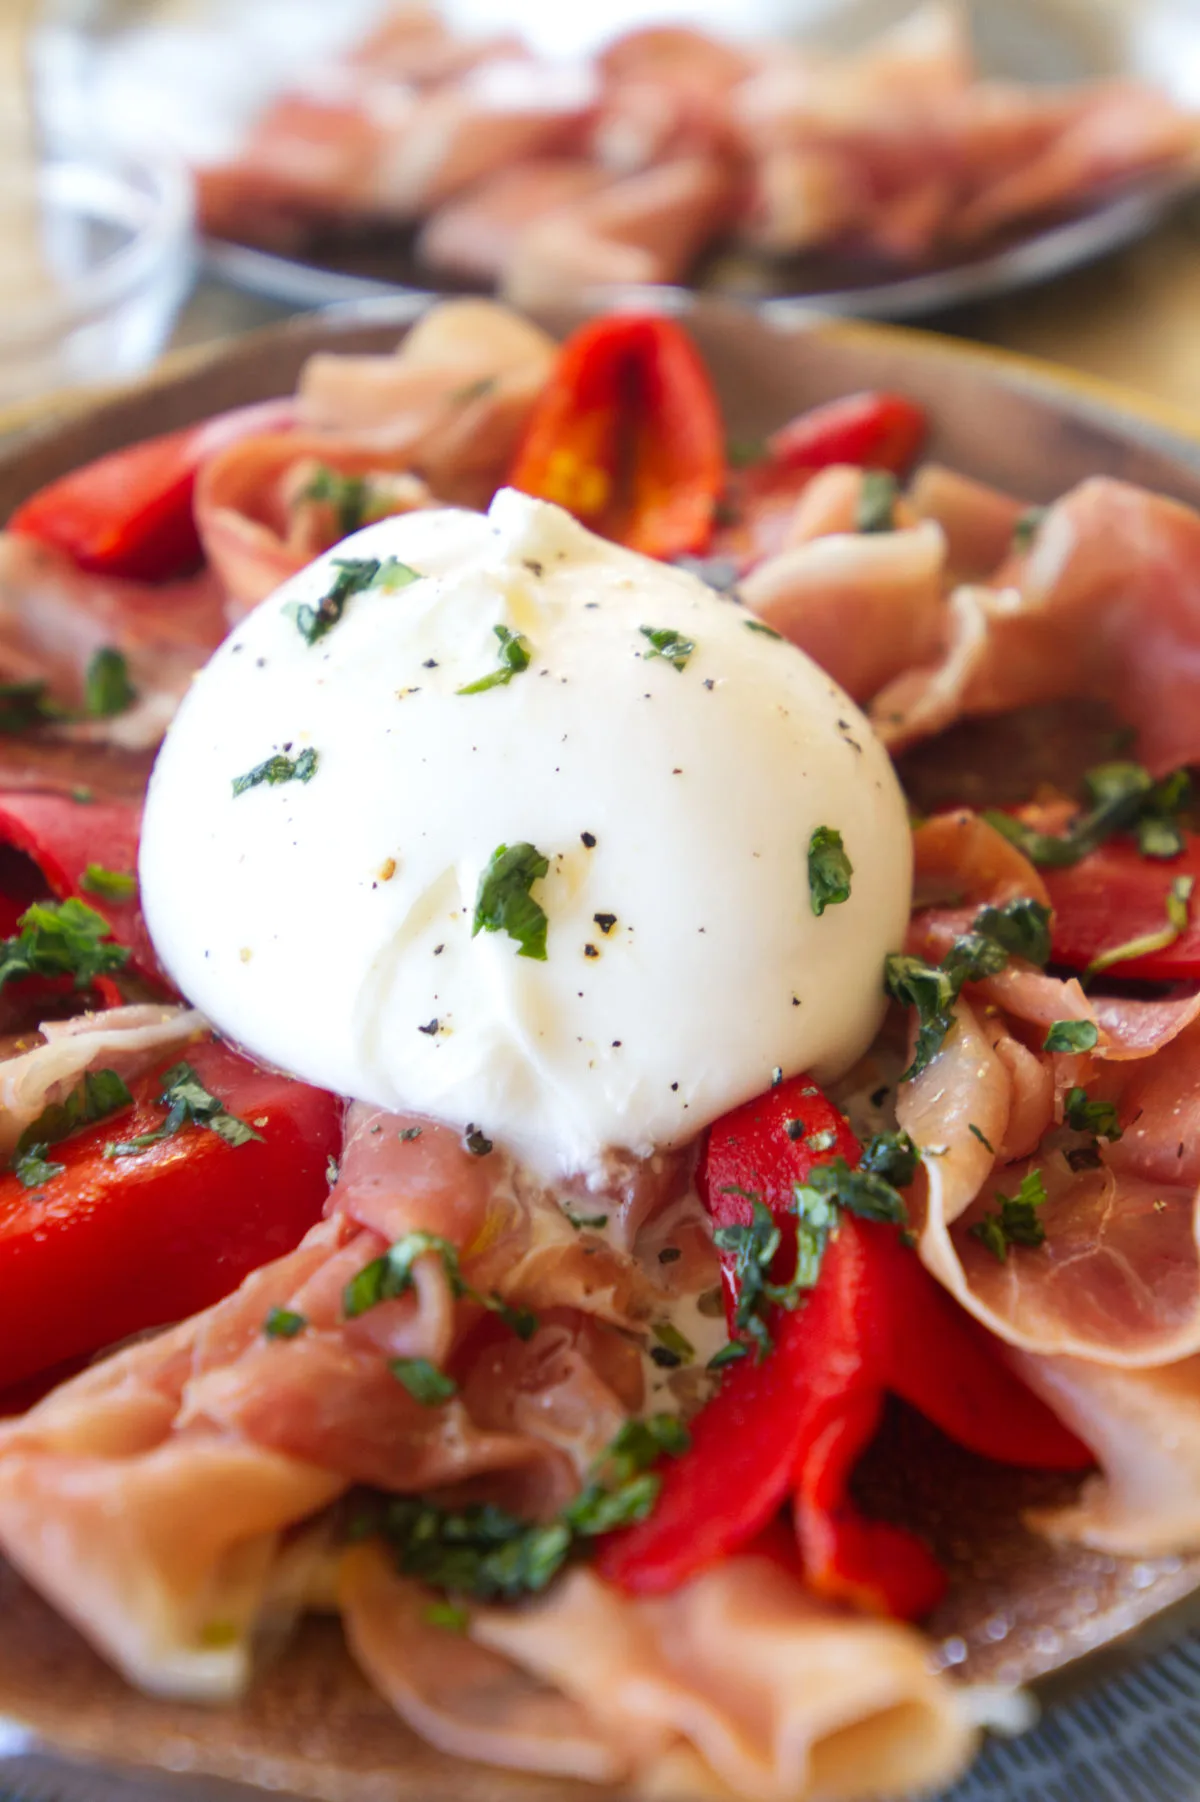 A plate of Burrata with serrano ham and roasted peppers.